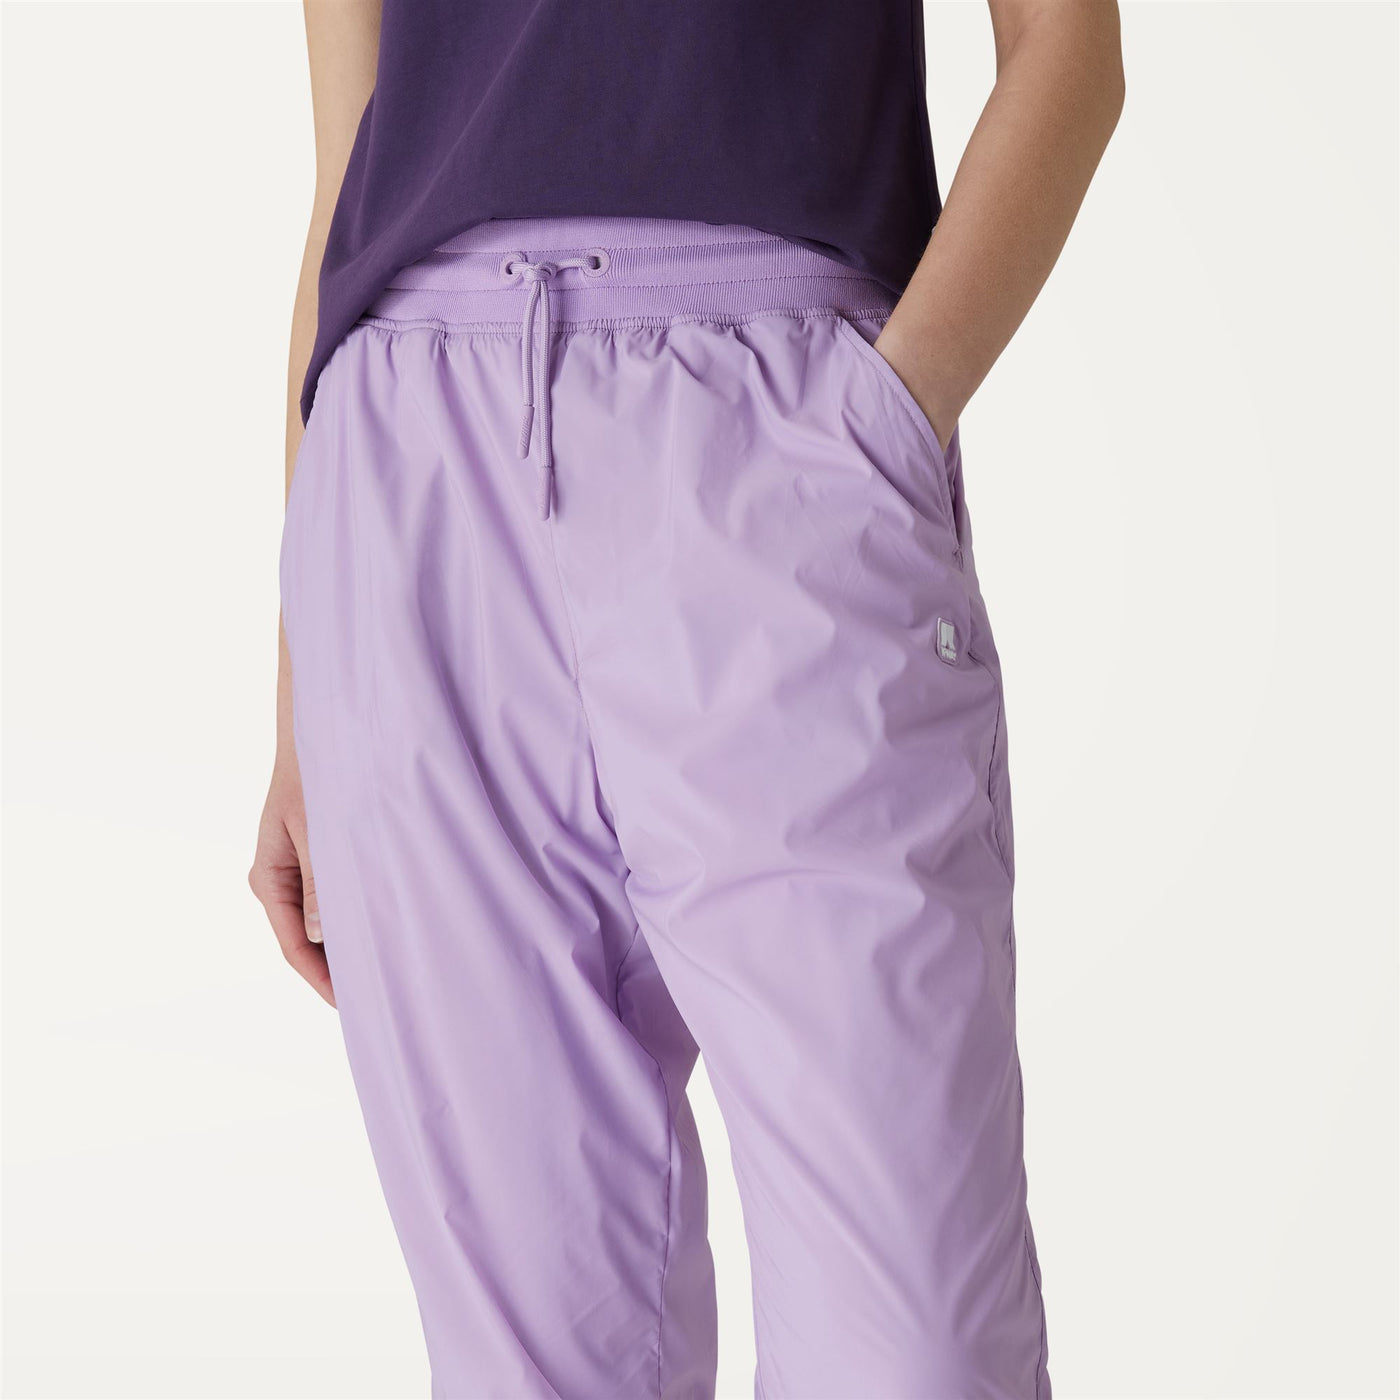 Pants Woman MELLY NY STRETCH Sport Trousers VIOLET PEONIA Detail Double				